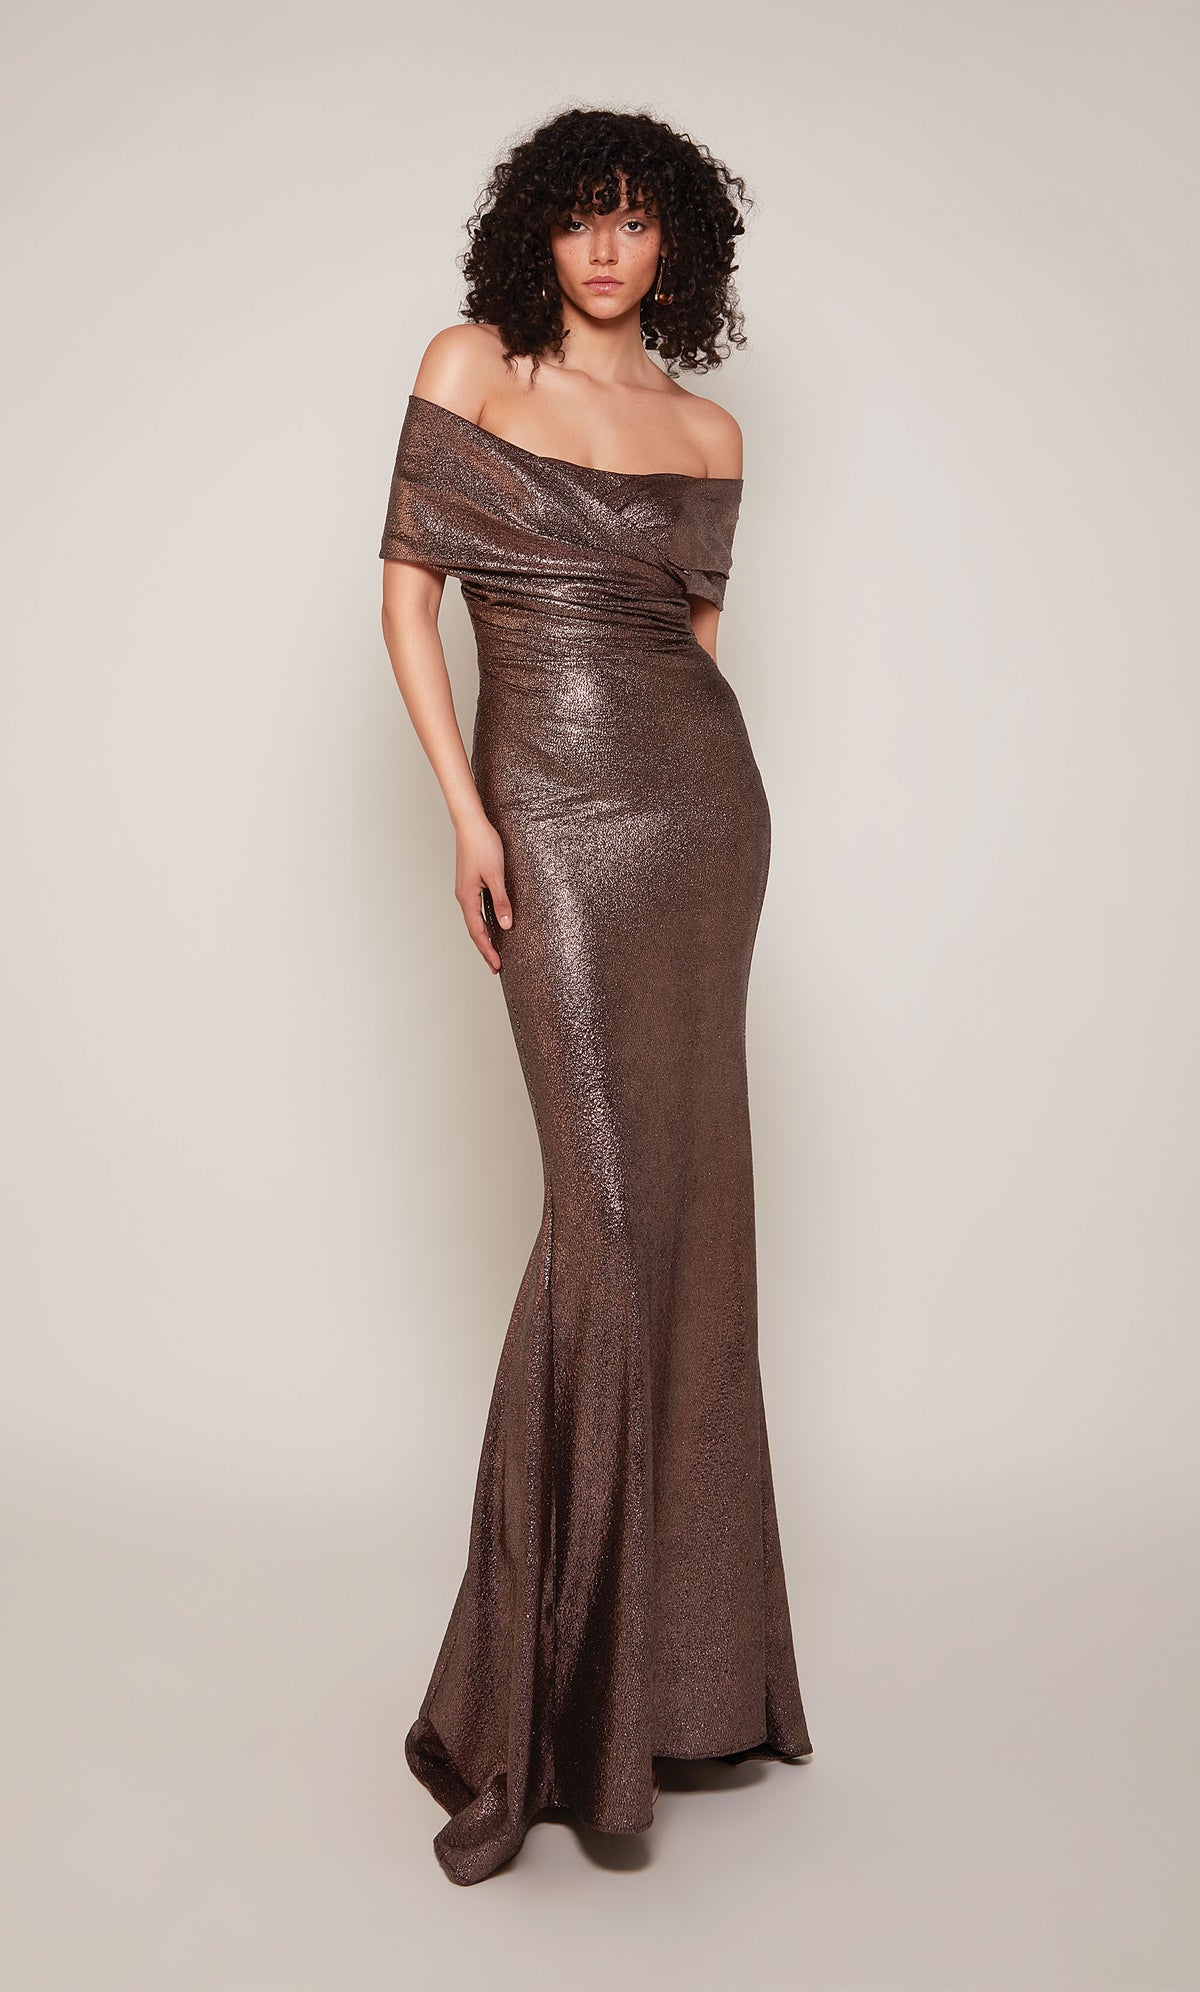 Off the shoulder draped formal dress with a fit and flare silhouette in a metallic cocoa color.